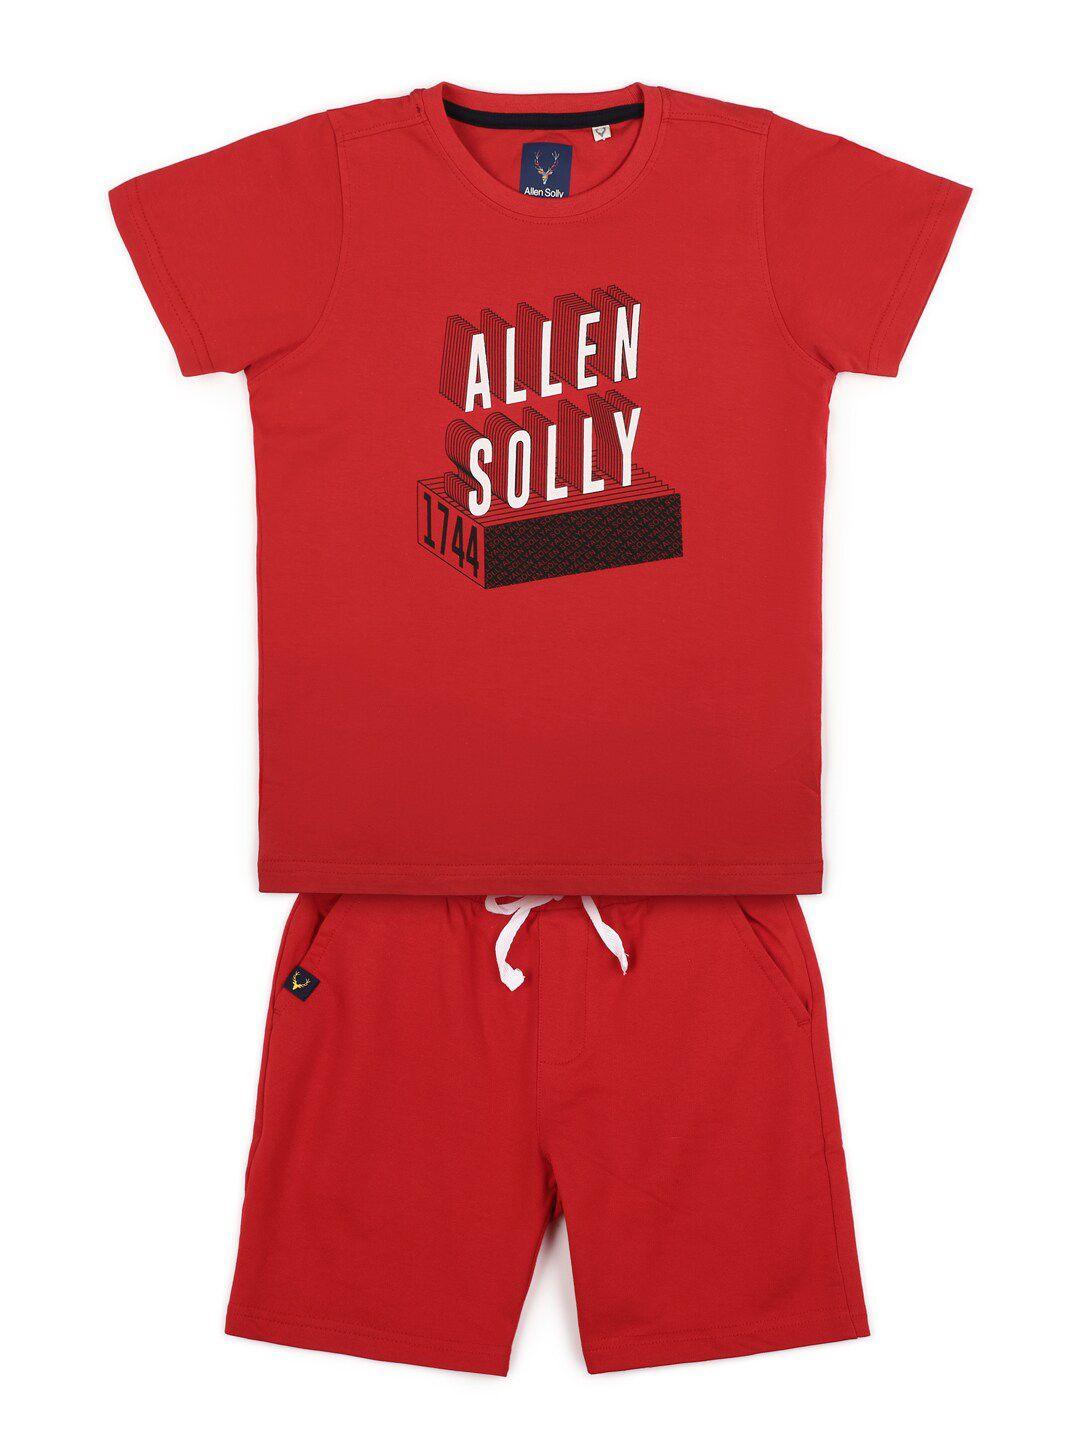 allen solly junior boys red & white pure cotton printed t-shirt with shorts